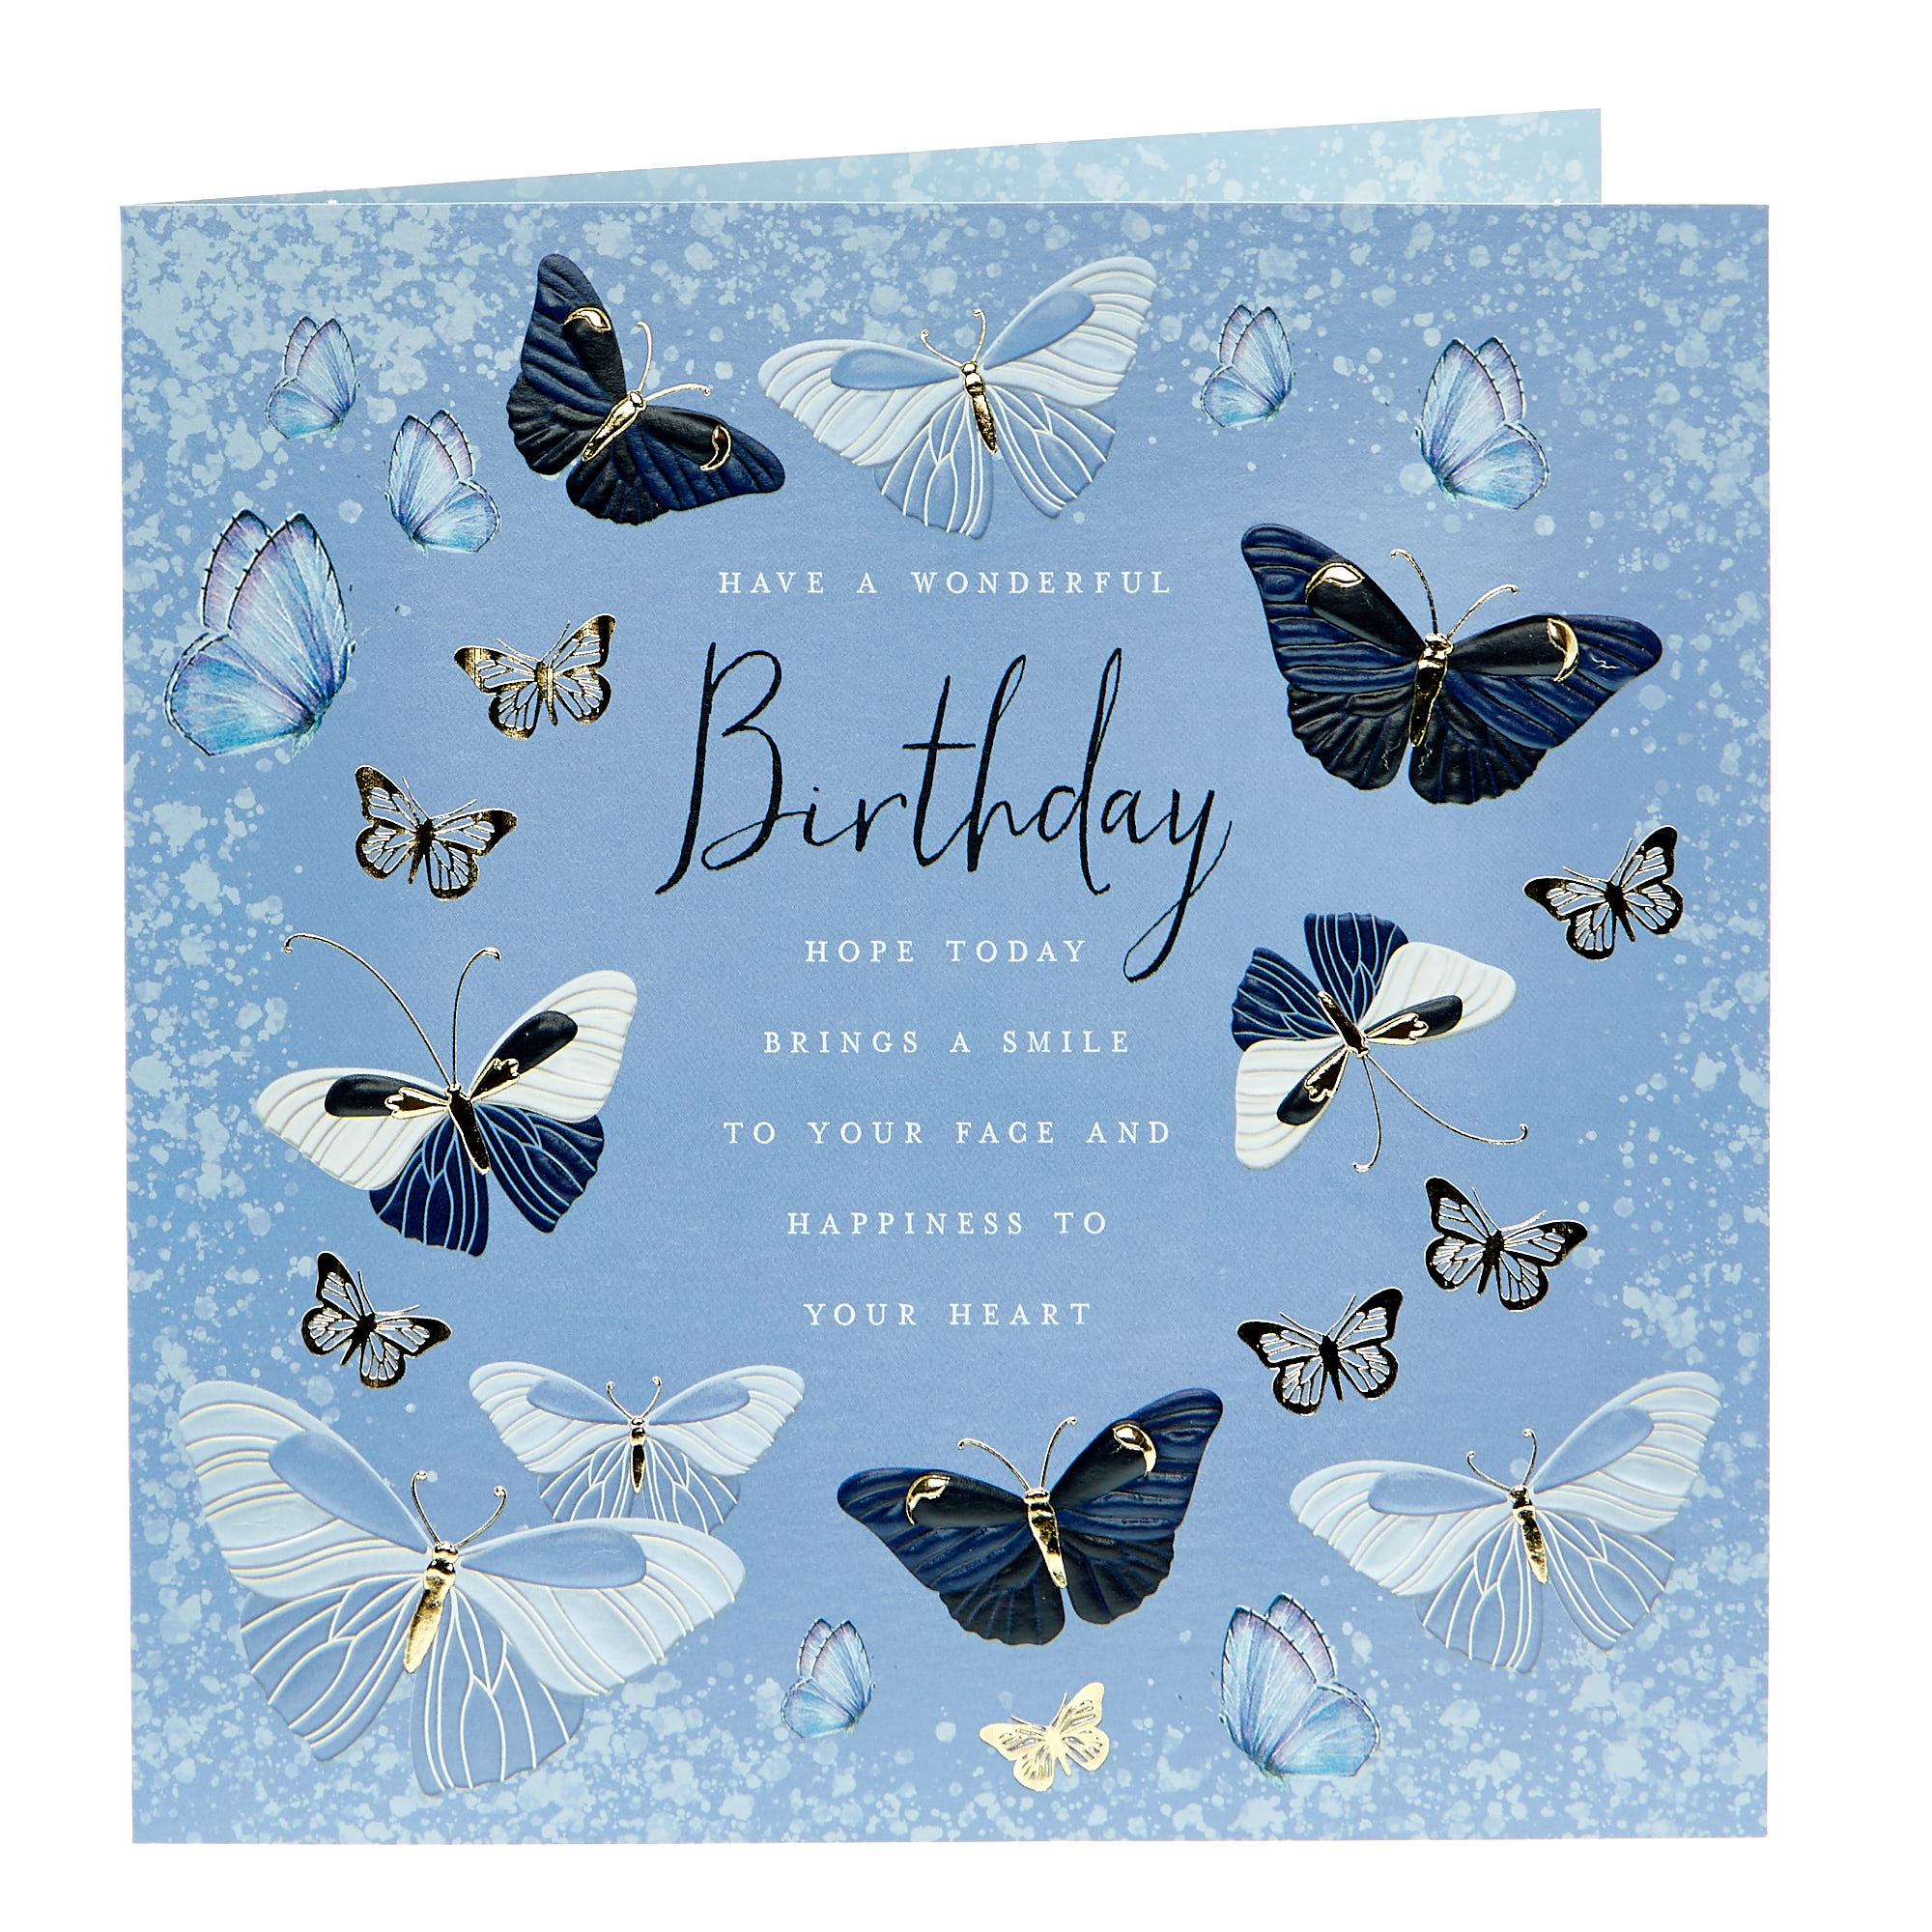 Platinum Birthday Card - Hope Today Brings A Smile